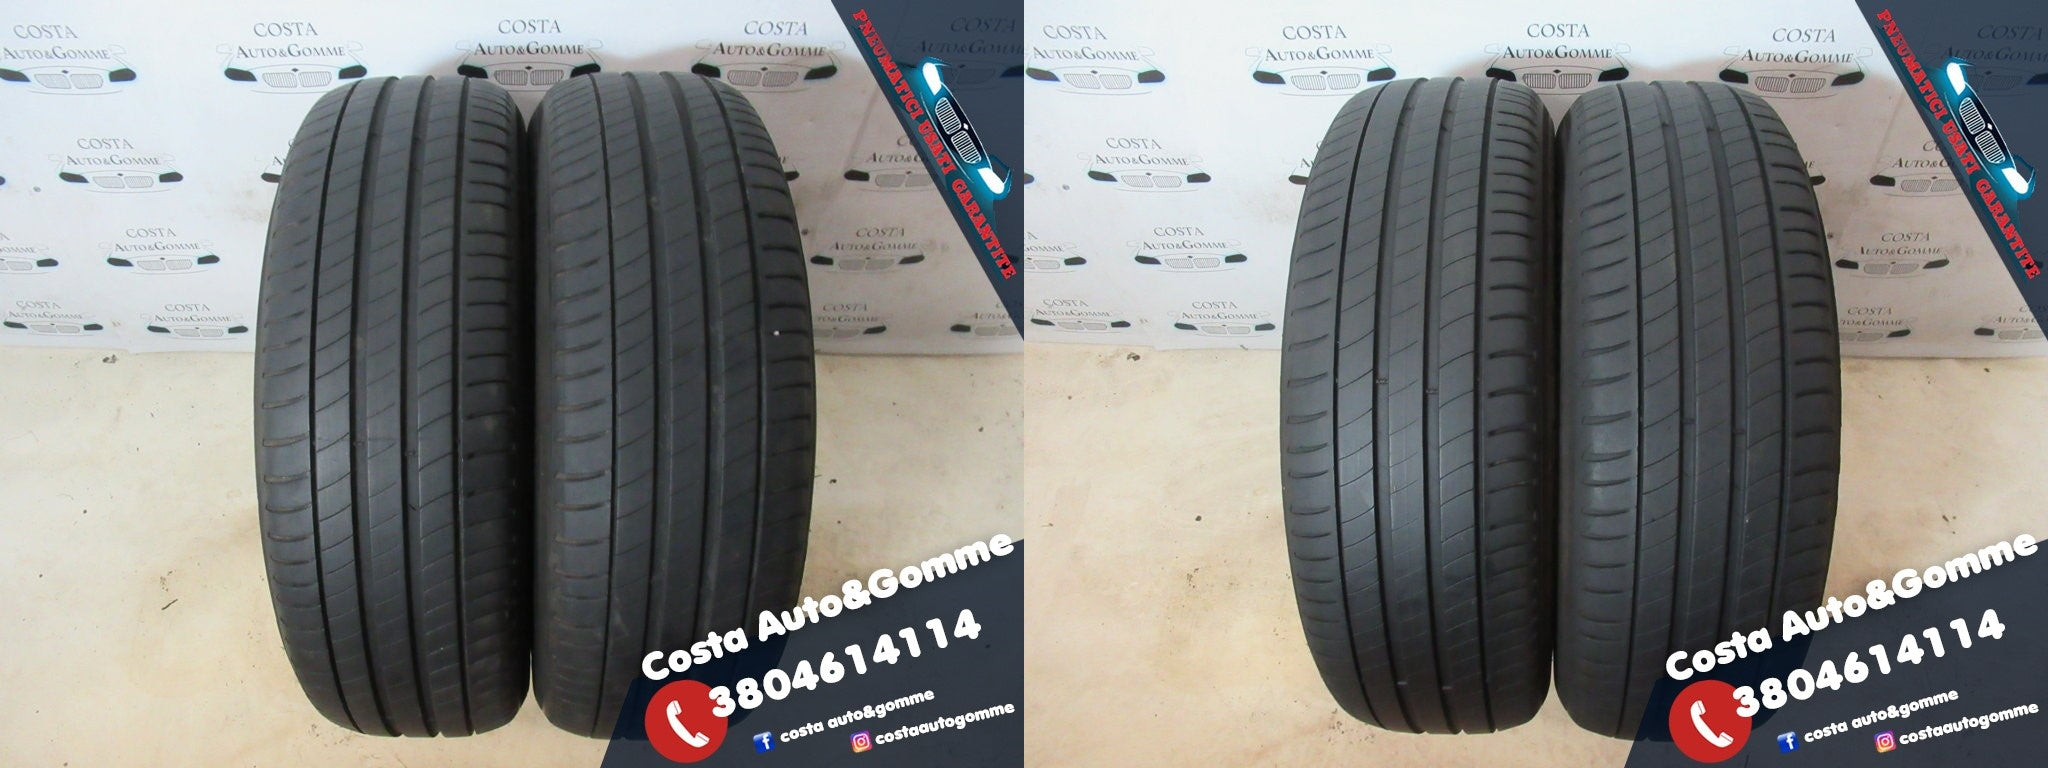 215 65 17 Michelin 85% 2019 215 65 R17 4 Gomme